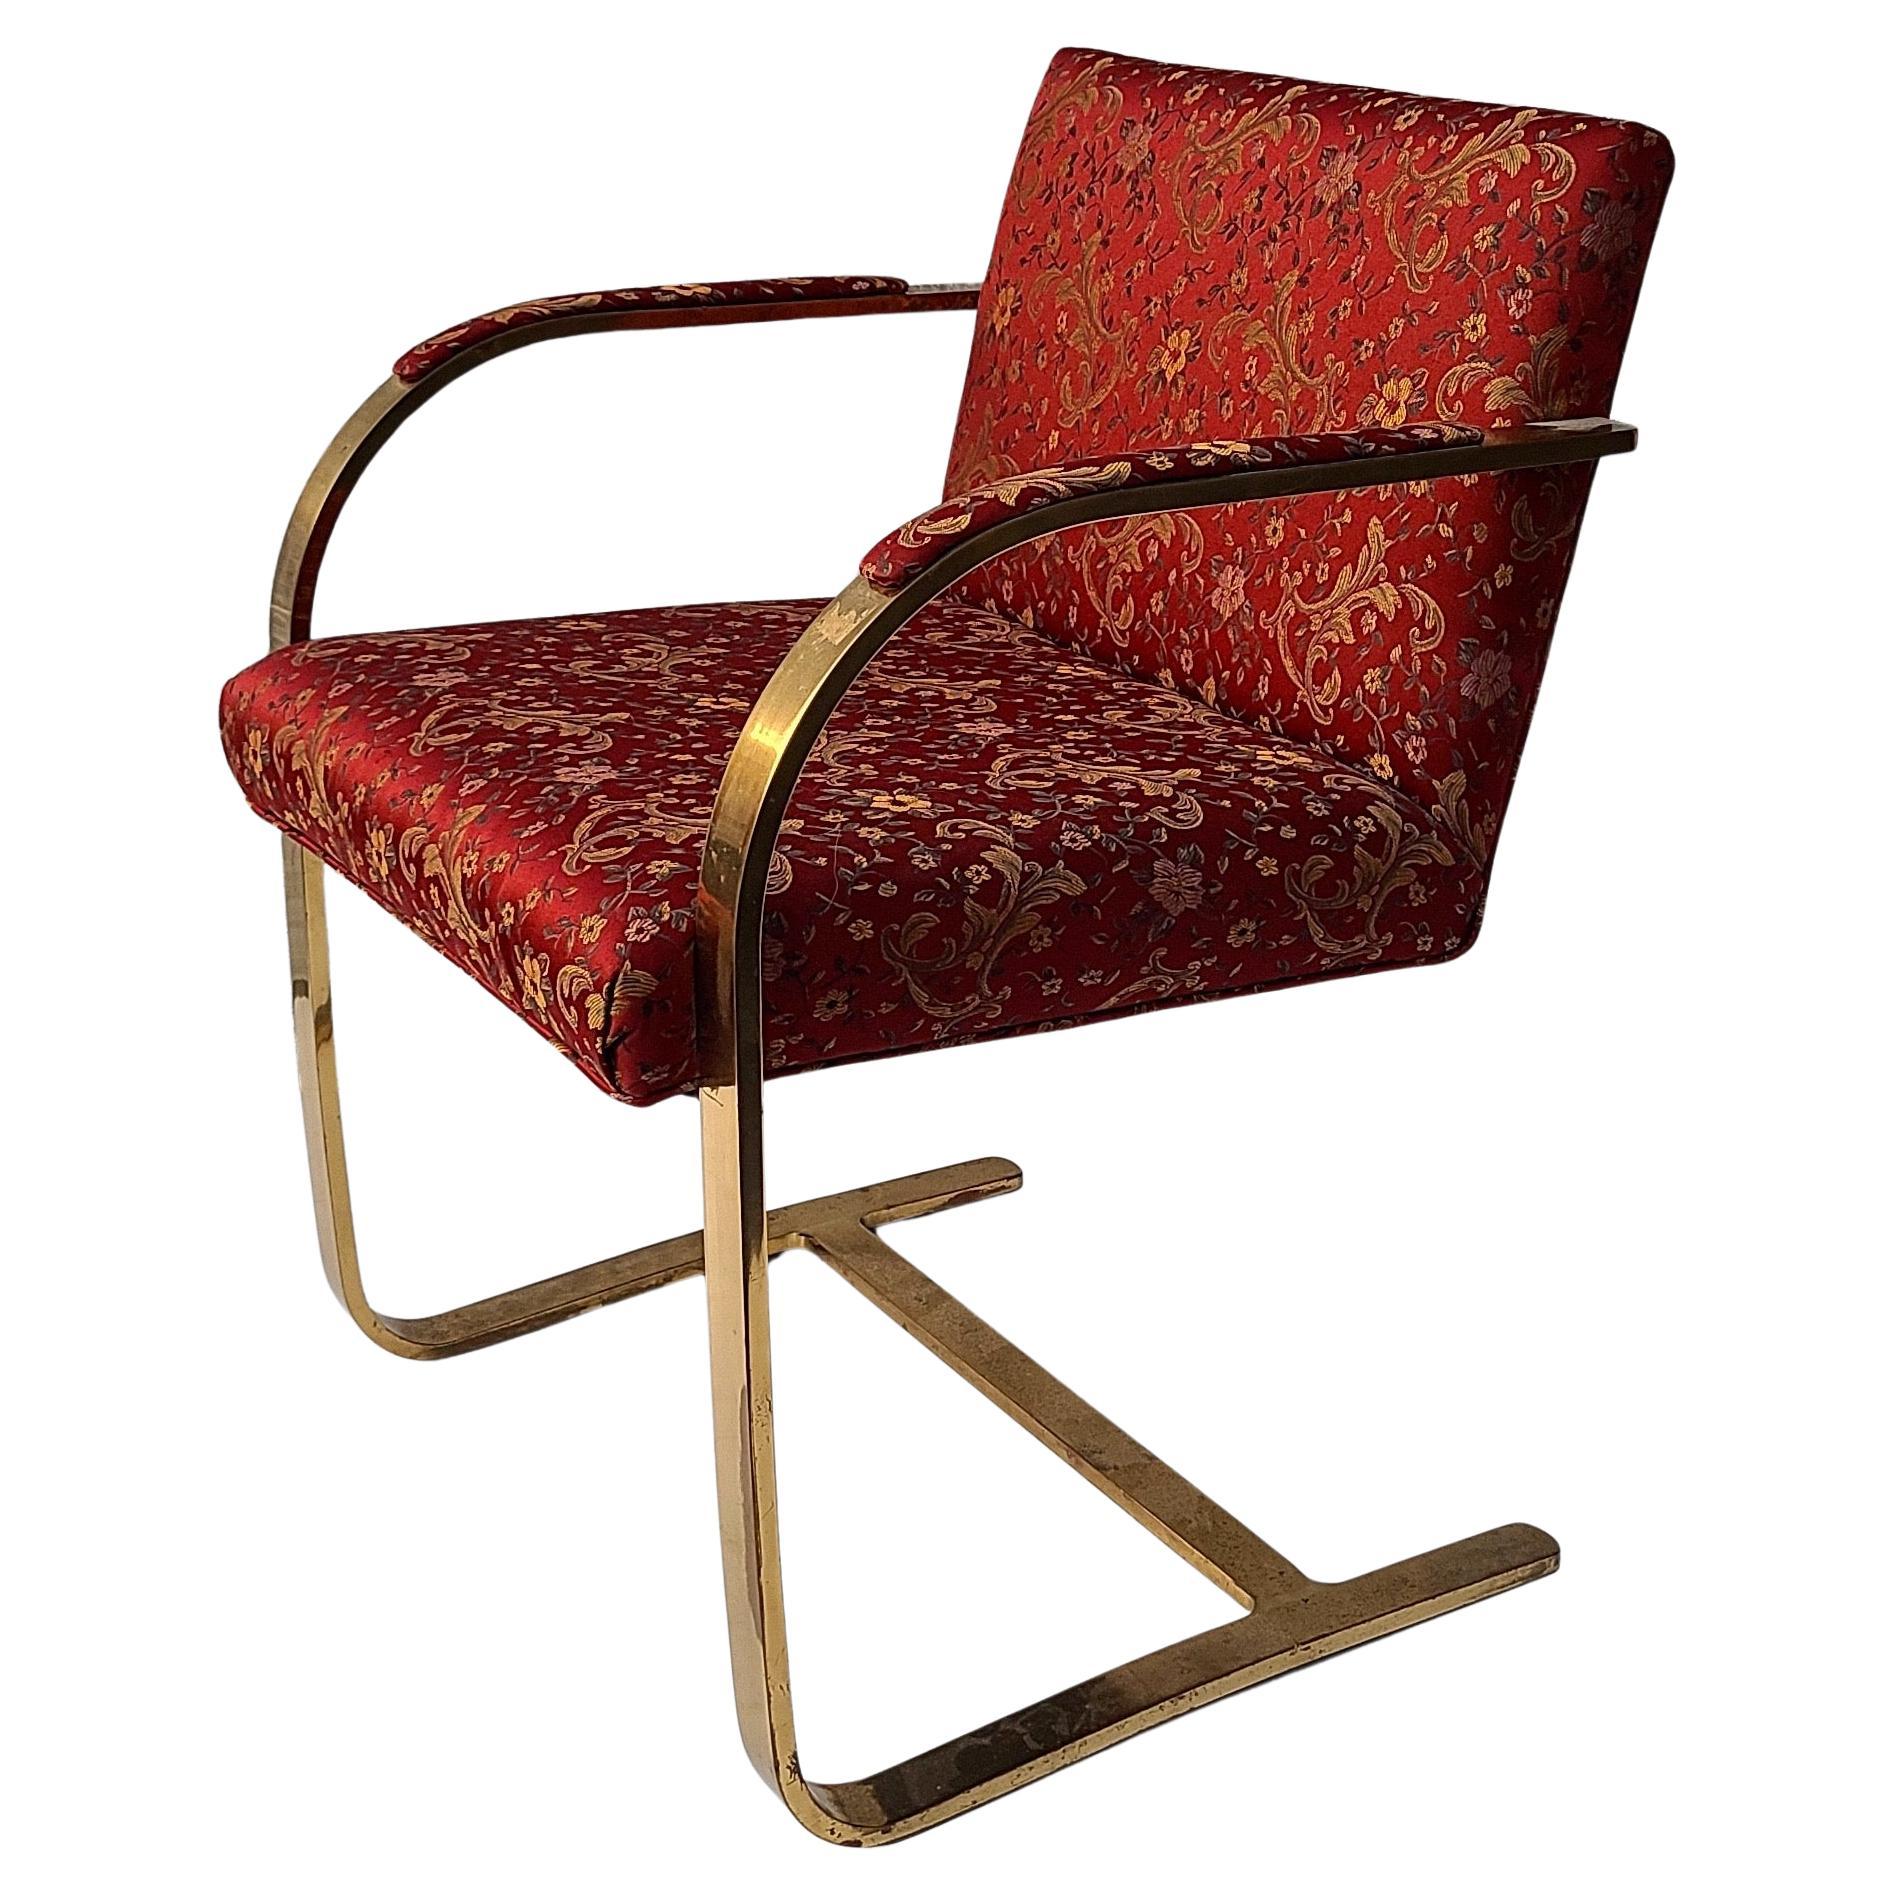 Bruno chair designed by Mies van der Rohe.
Solid bronze fame: Unrestored.

